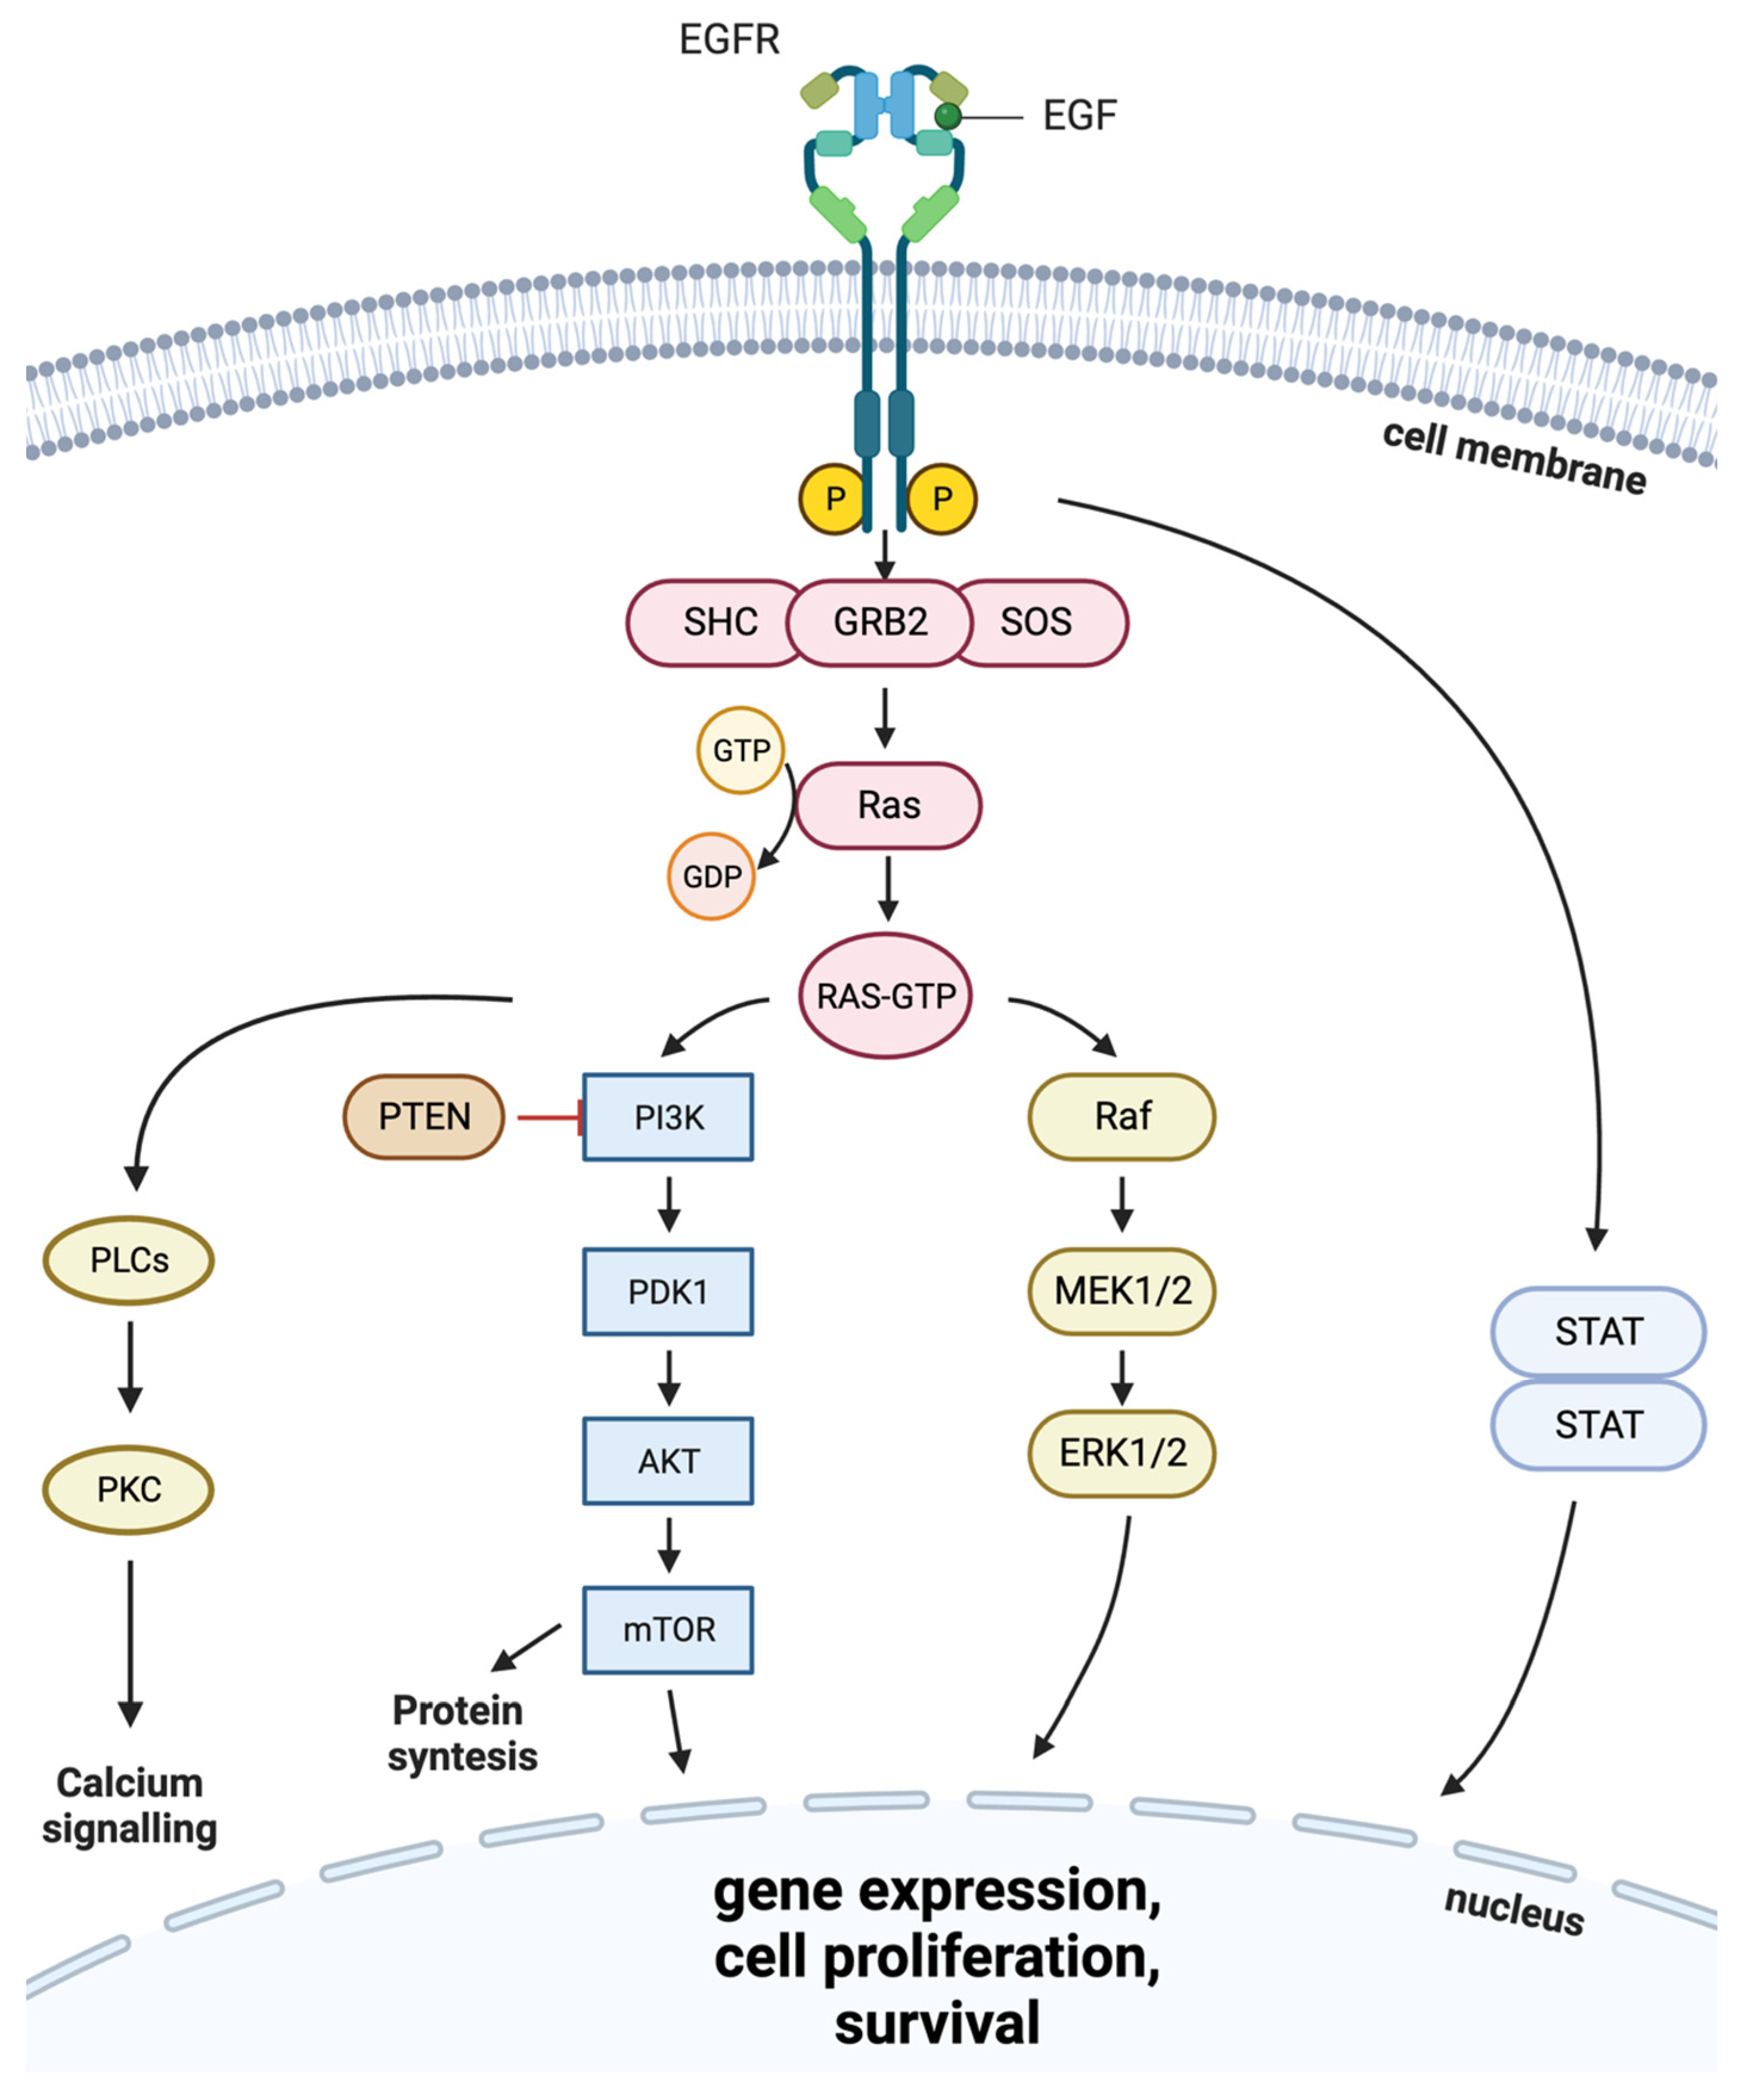 Cells | Free Full-Text | Targeted Inhibitors of EGFR: Structure